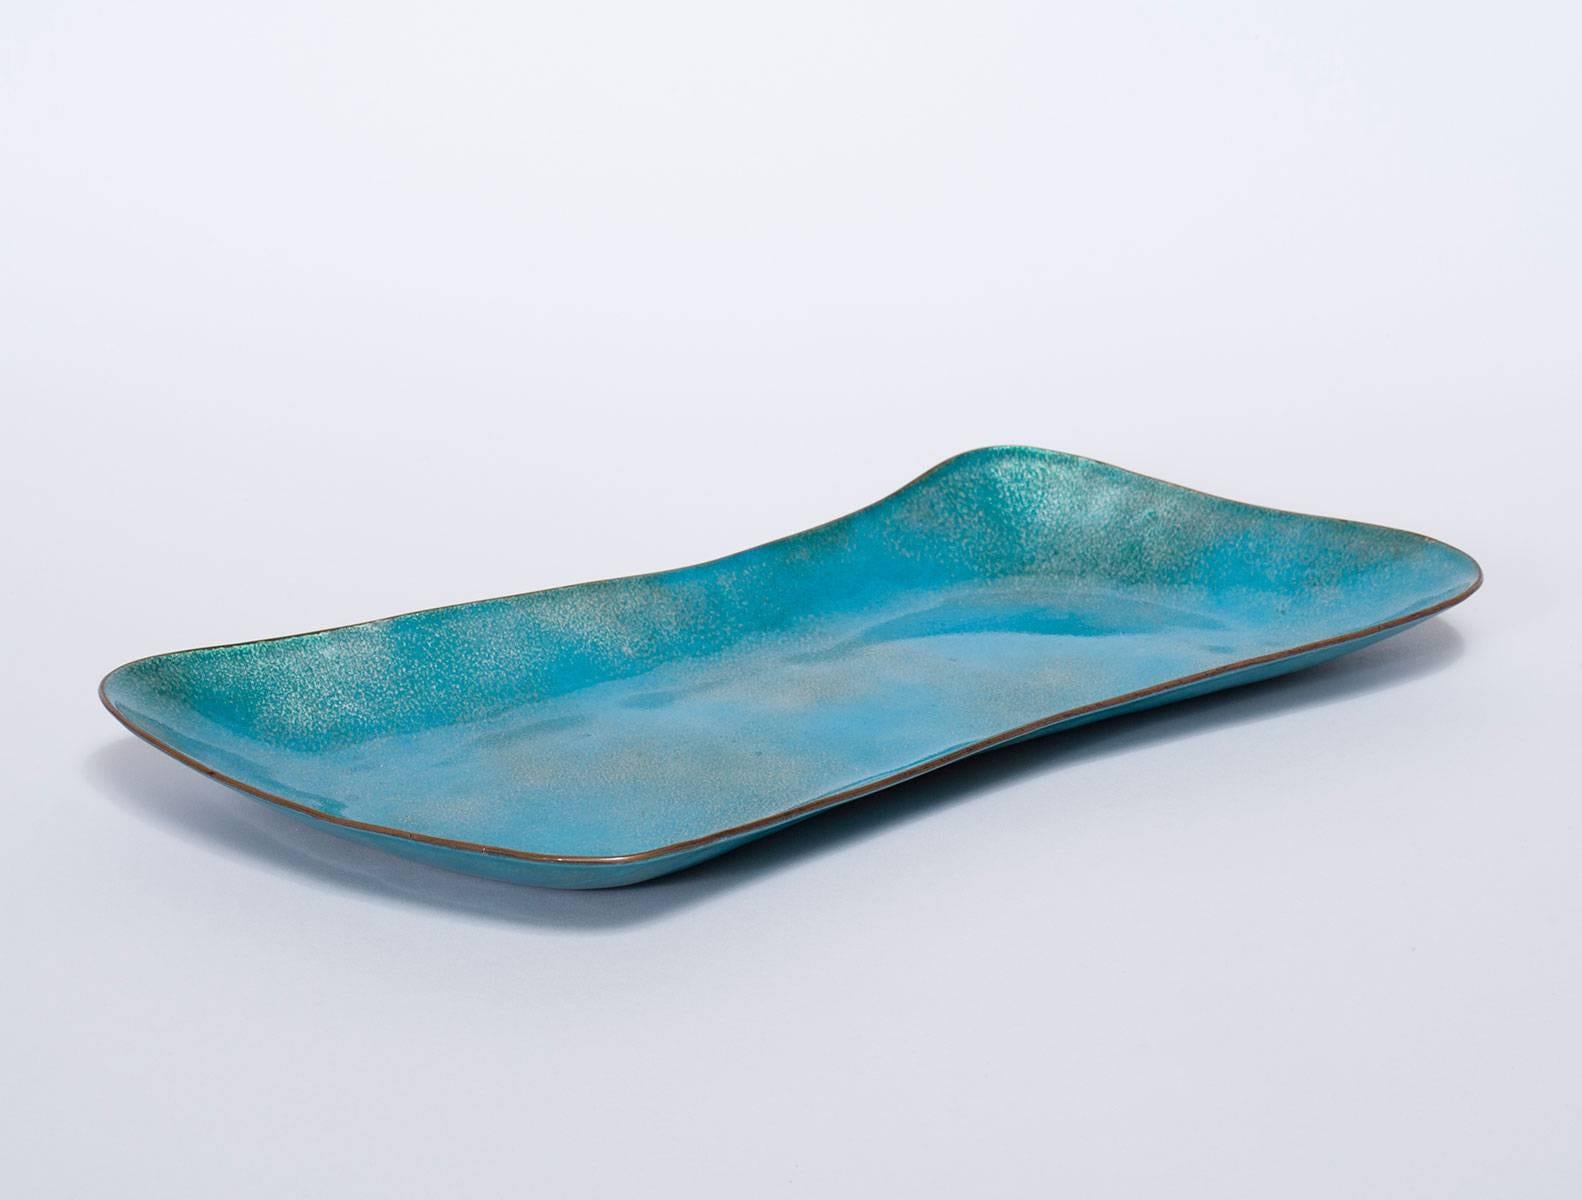 Large, organic enameled tray by Paolo De Poli. Signed.